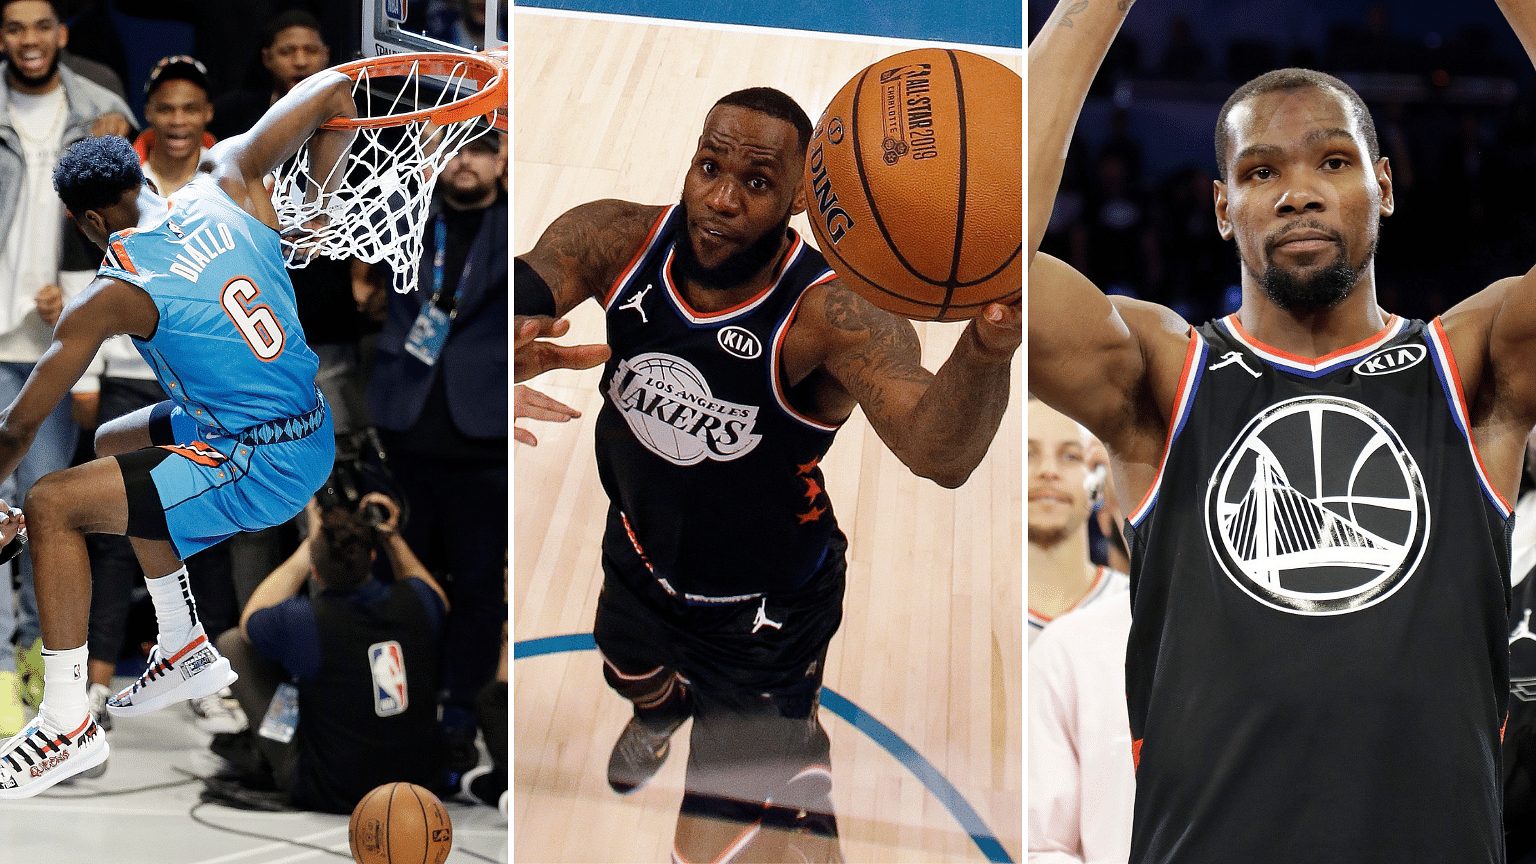 A look at the highlights from the just-concluded All-Star Weekend 2019.